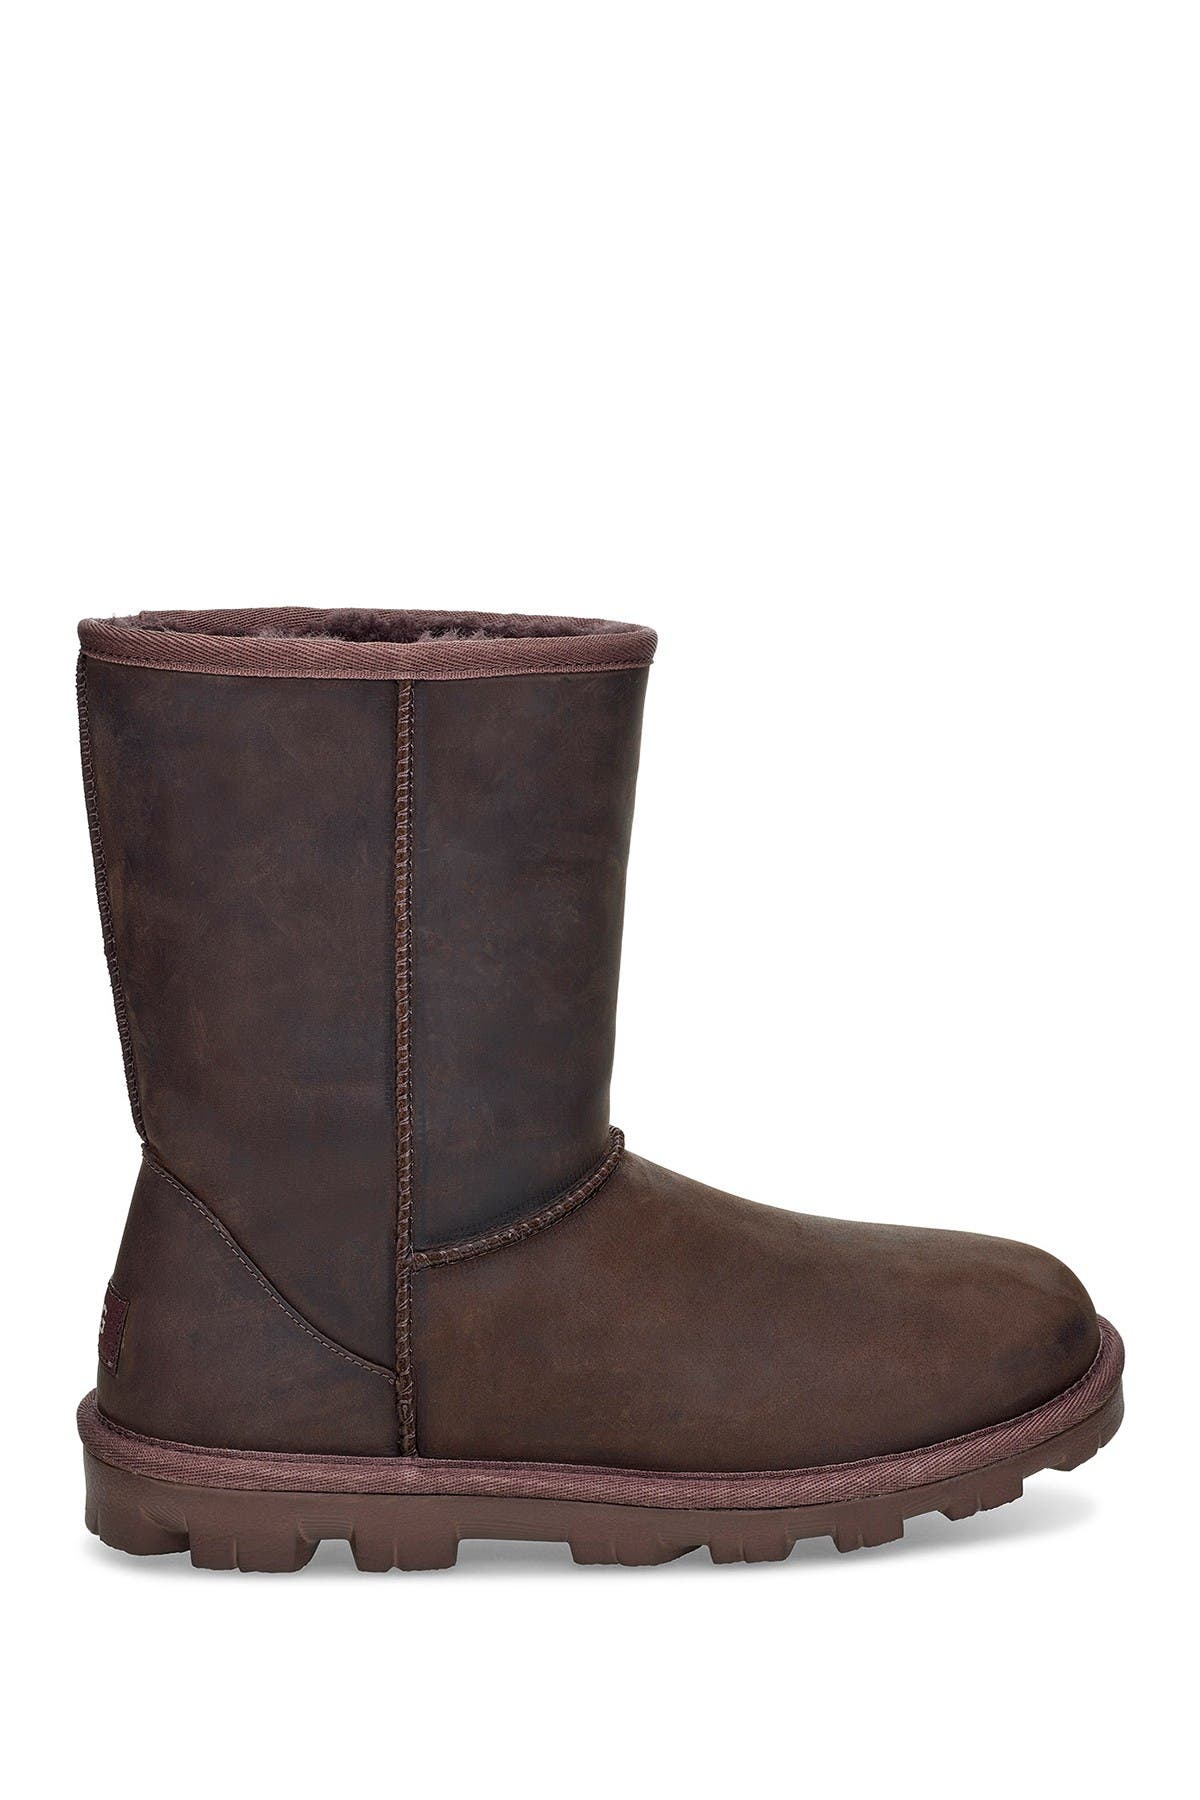 ugg boots leather short